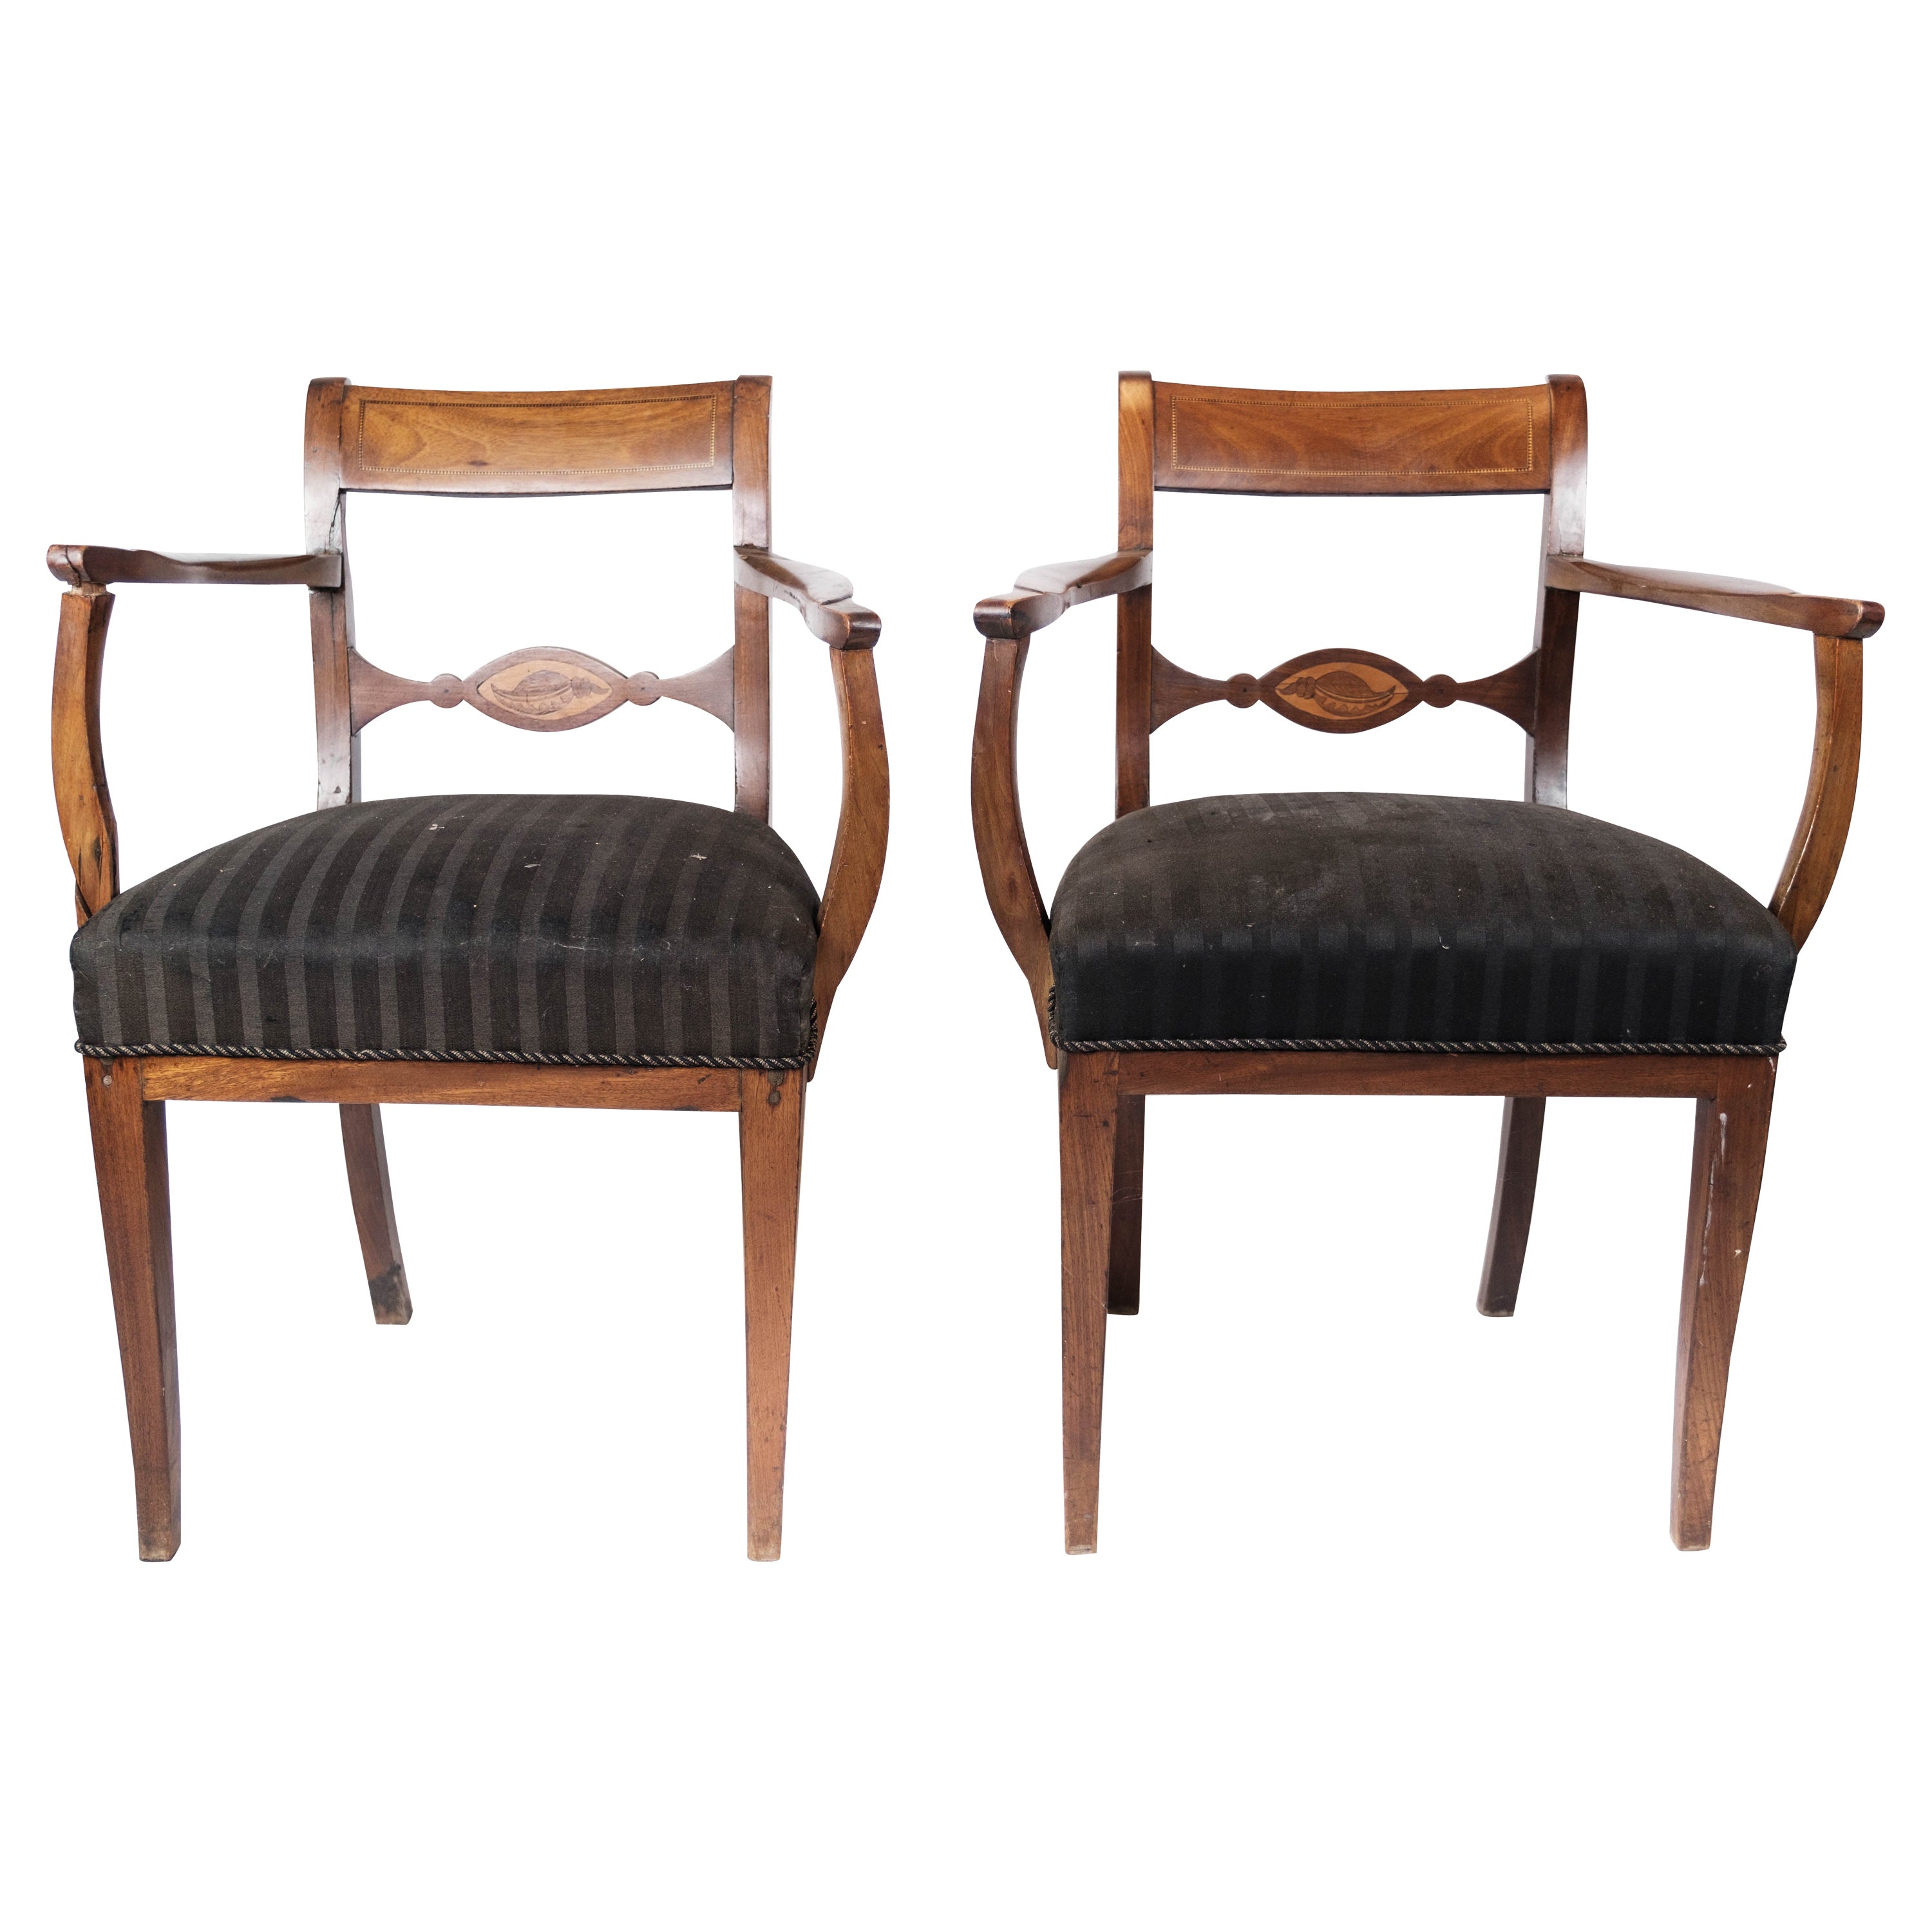 Set of Two Armchairs Made In Mahogany From 1860s For Sale